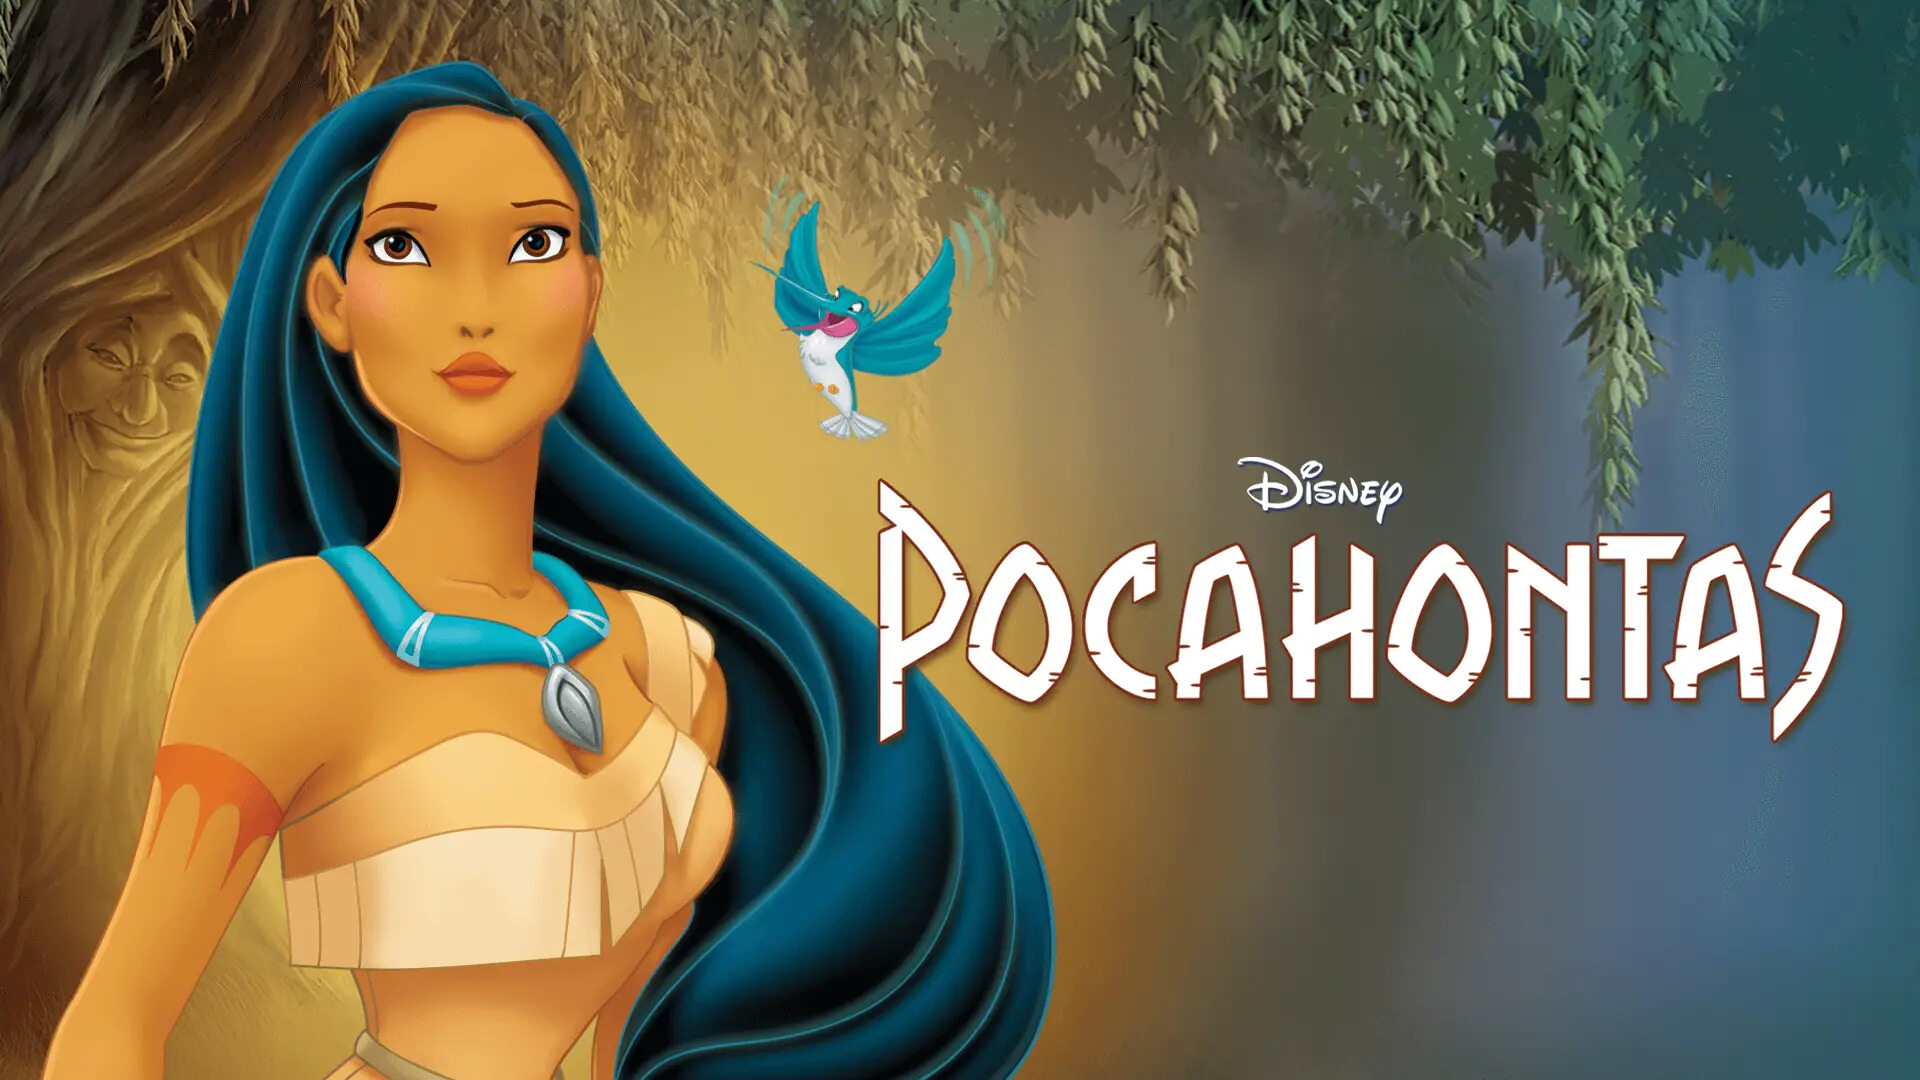 32 Facts about the movie Pocahontas - Facts.net